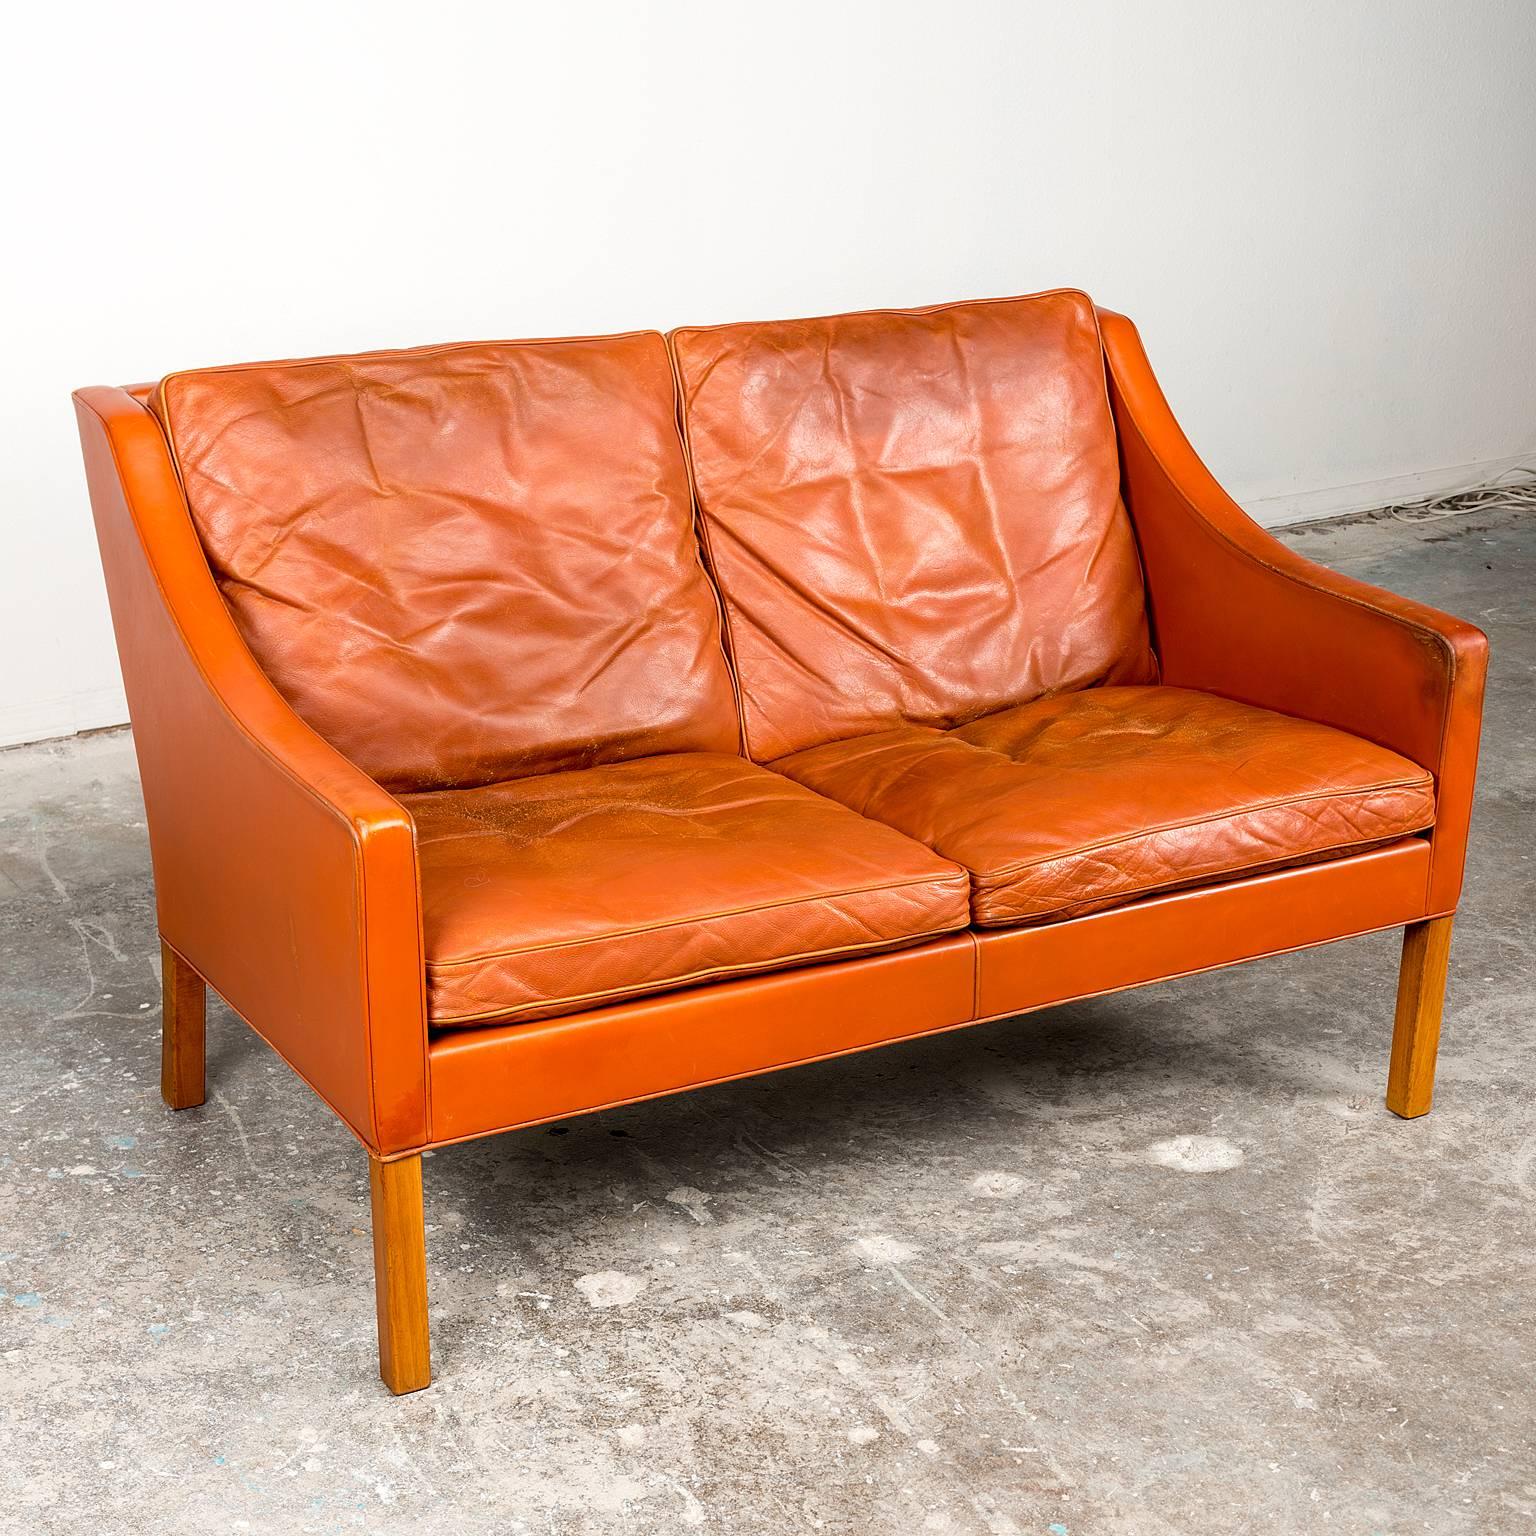 A two-seat sofa by Borge Mogensen for Federicia Stolefabrik in well-patinated orange-cognac leather. Leather completely intact, beech legs in excellent vintage condition. Denmark, circa 1965.